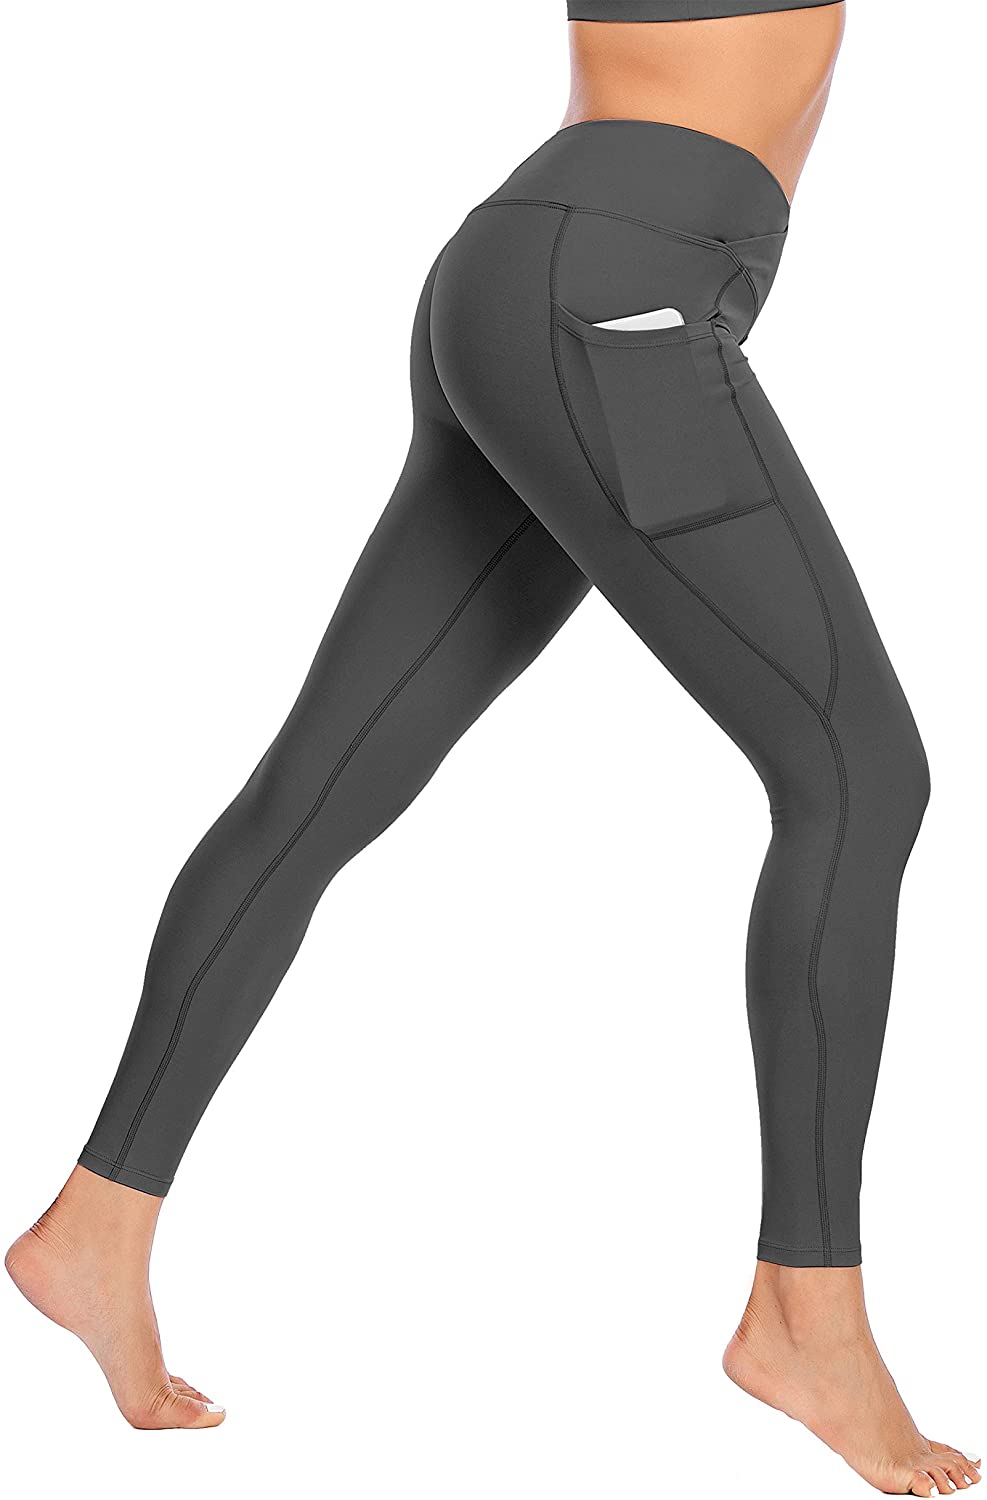 Miss Adola Workout Leggings for Women with Pocket-High Waisted Yoga Pants- Tummy | eBay